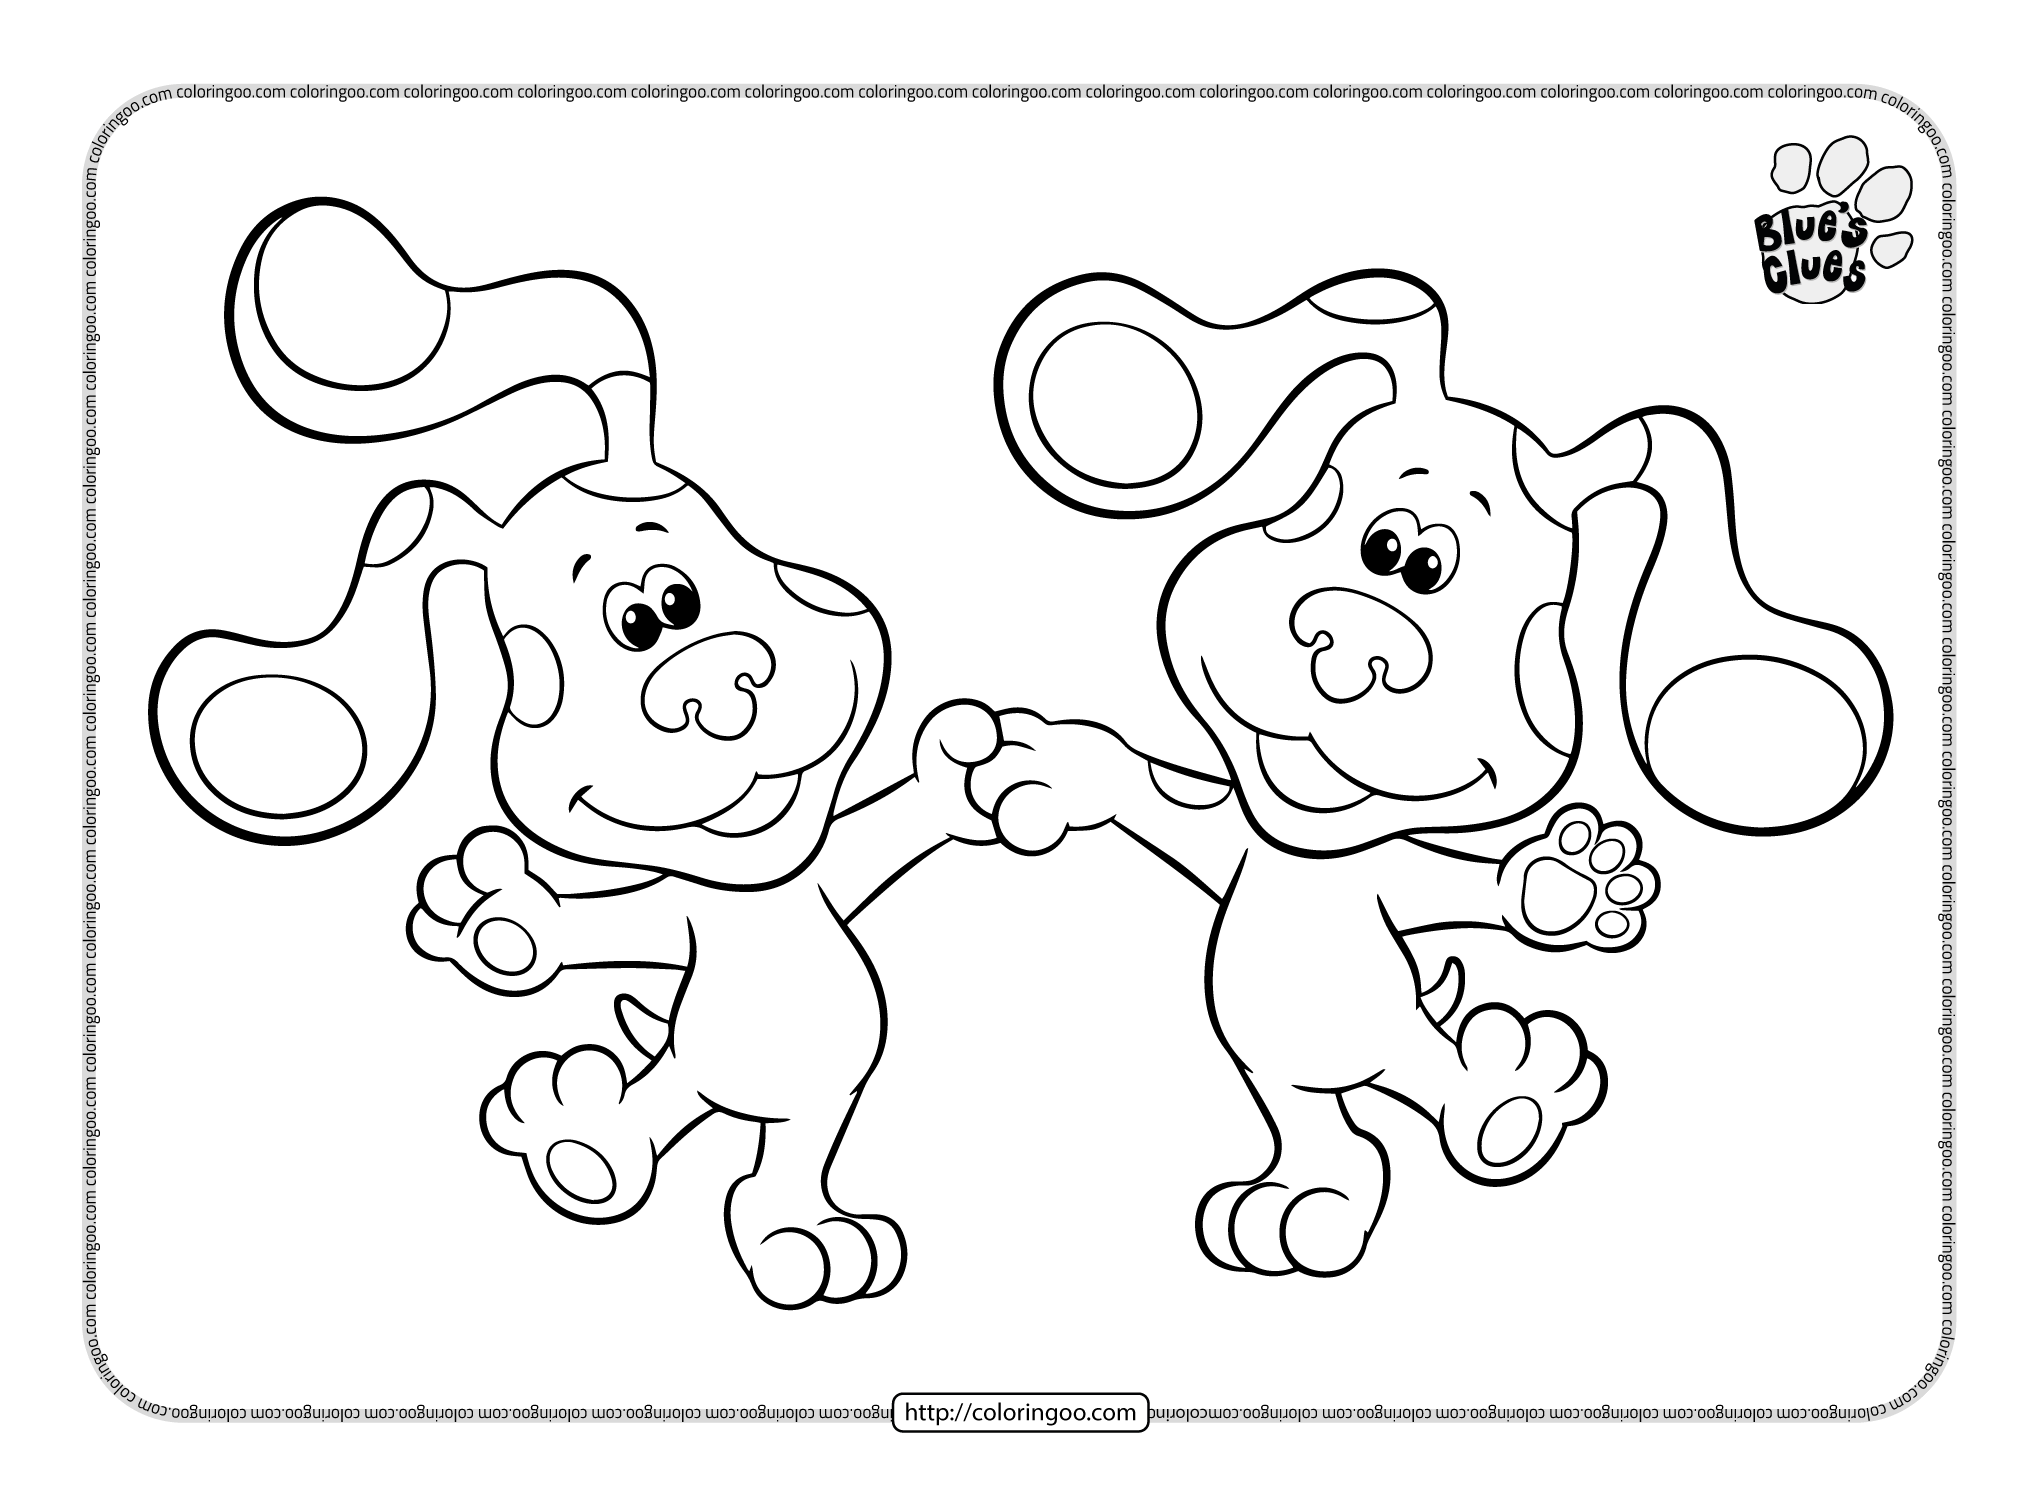 blue and magenta pdf coloring pages